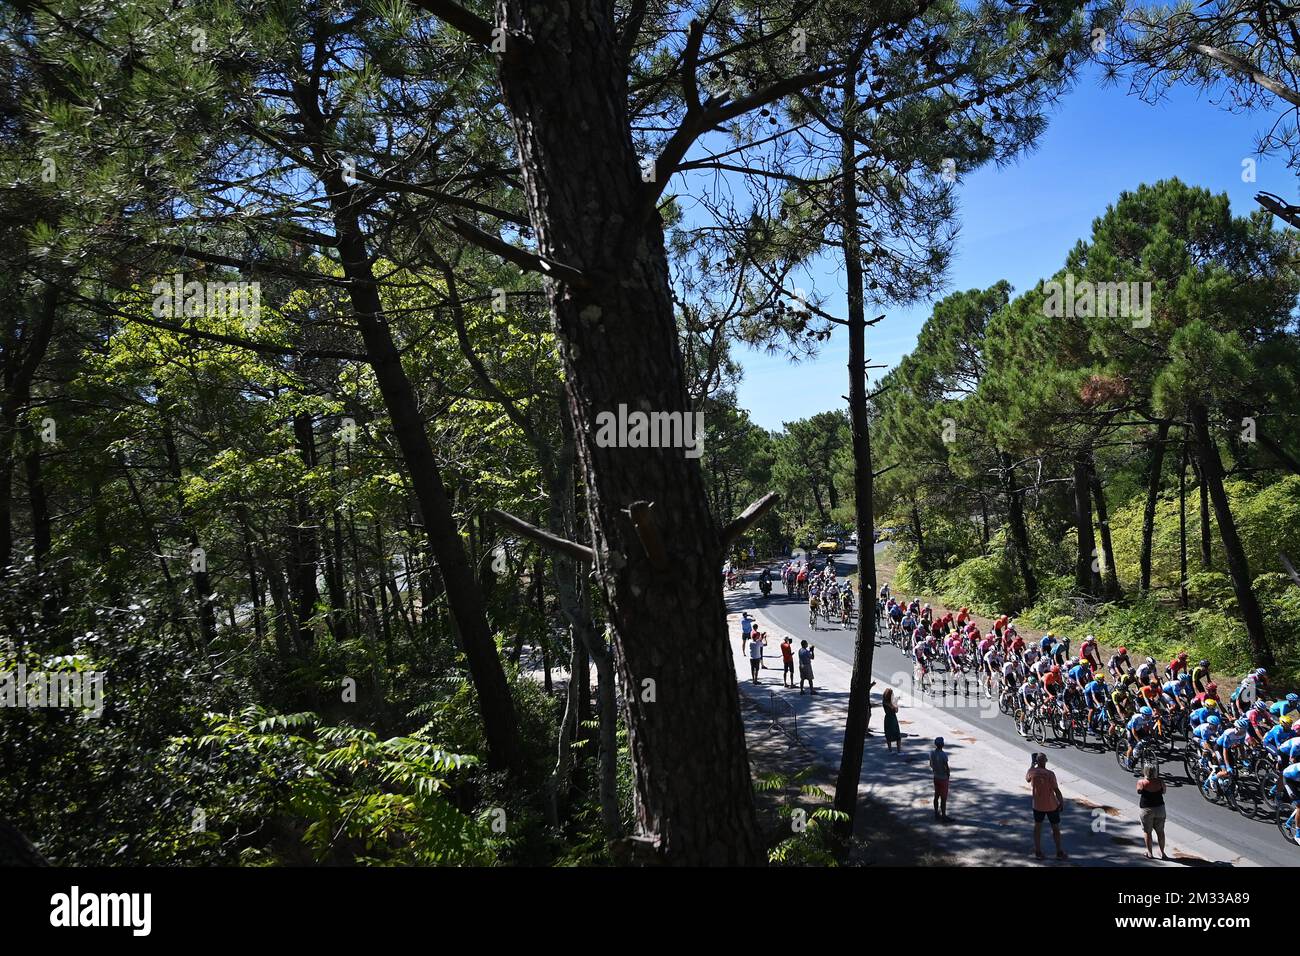 Illustration picture taken during the ninth stage of the 107th edition of the Tour de France cycling race from Ile d'Oleron Le Chateau-d'Oleron to Ile de Re Saint-Martin-de-Re (168,5km), in France, Tuesday 08 September 2020. This year's Tour de France was postponed due to the worldwide Covid-19 pandemic. The 2020 race starts in Nice on Saturday 29 August and ends on 20 September. BELGA PHOTO DAVID STOCKMAN Stock Photo